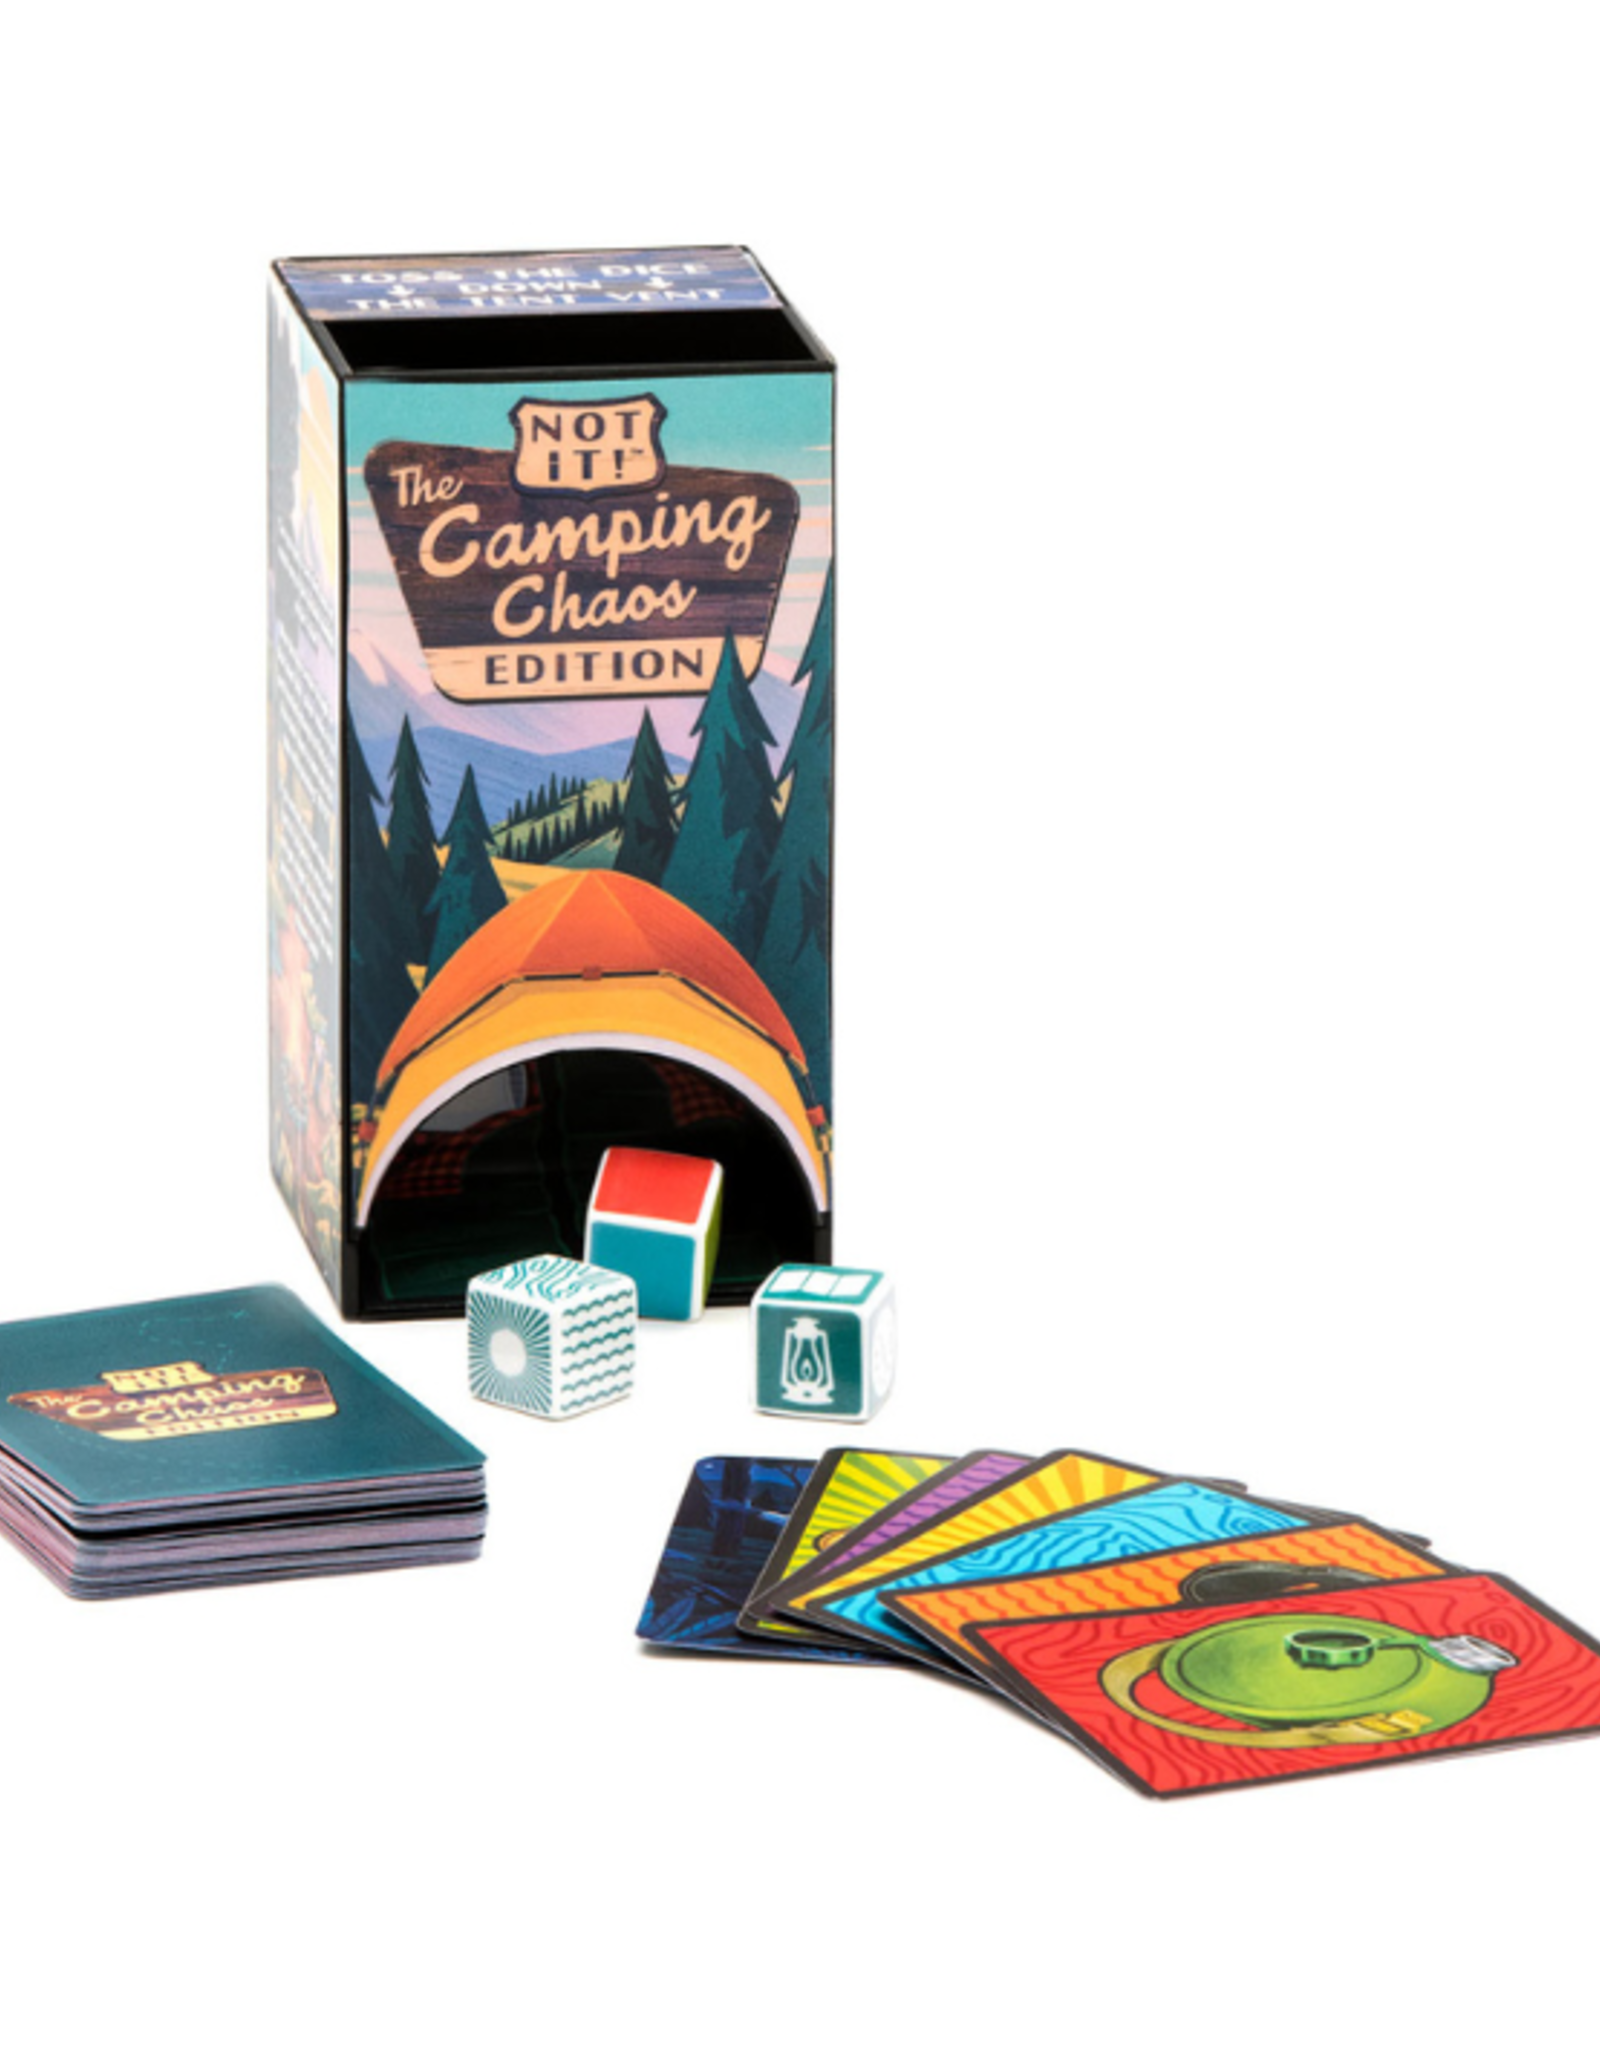 The Good Game Company - Not It! Camping Chaos